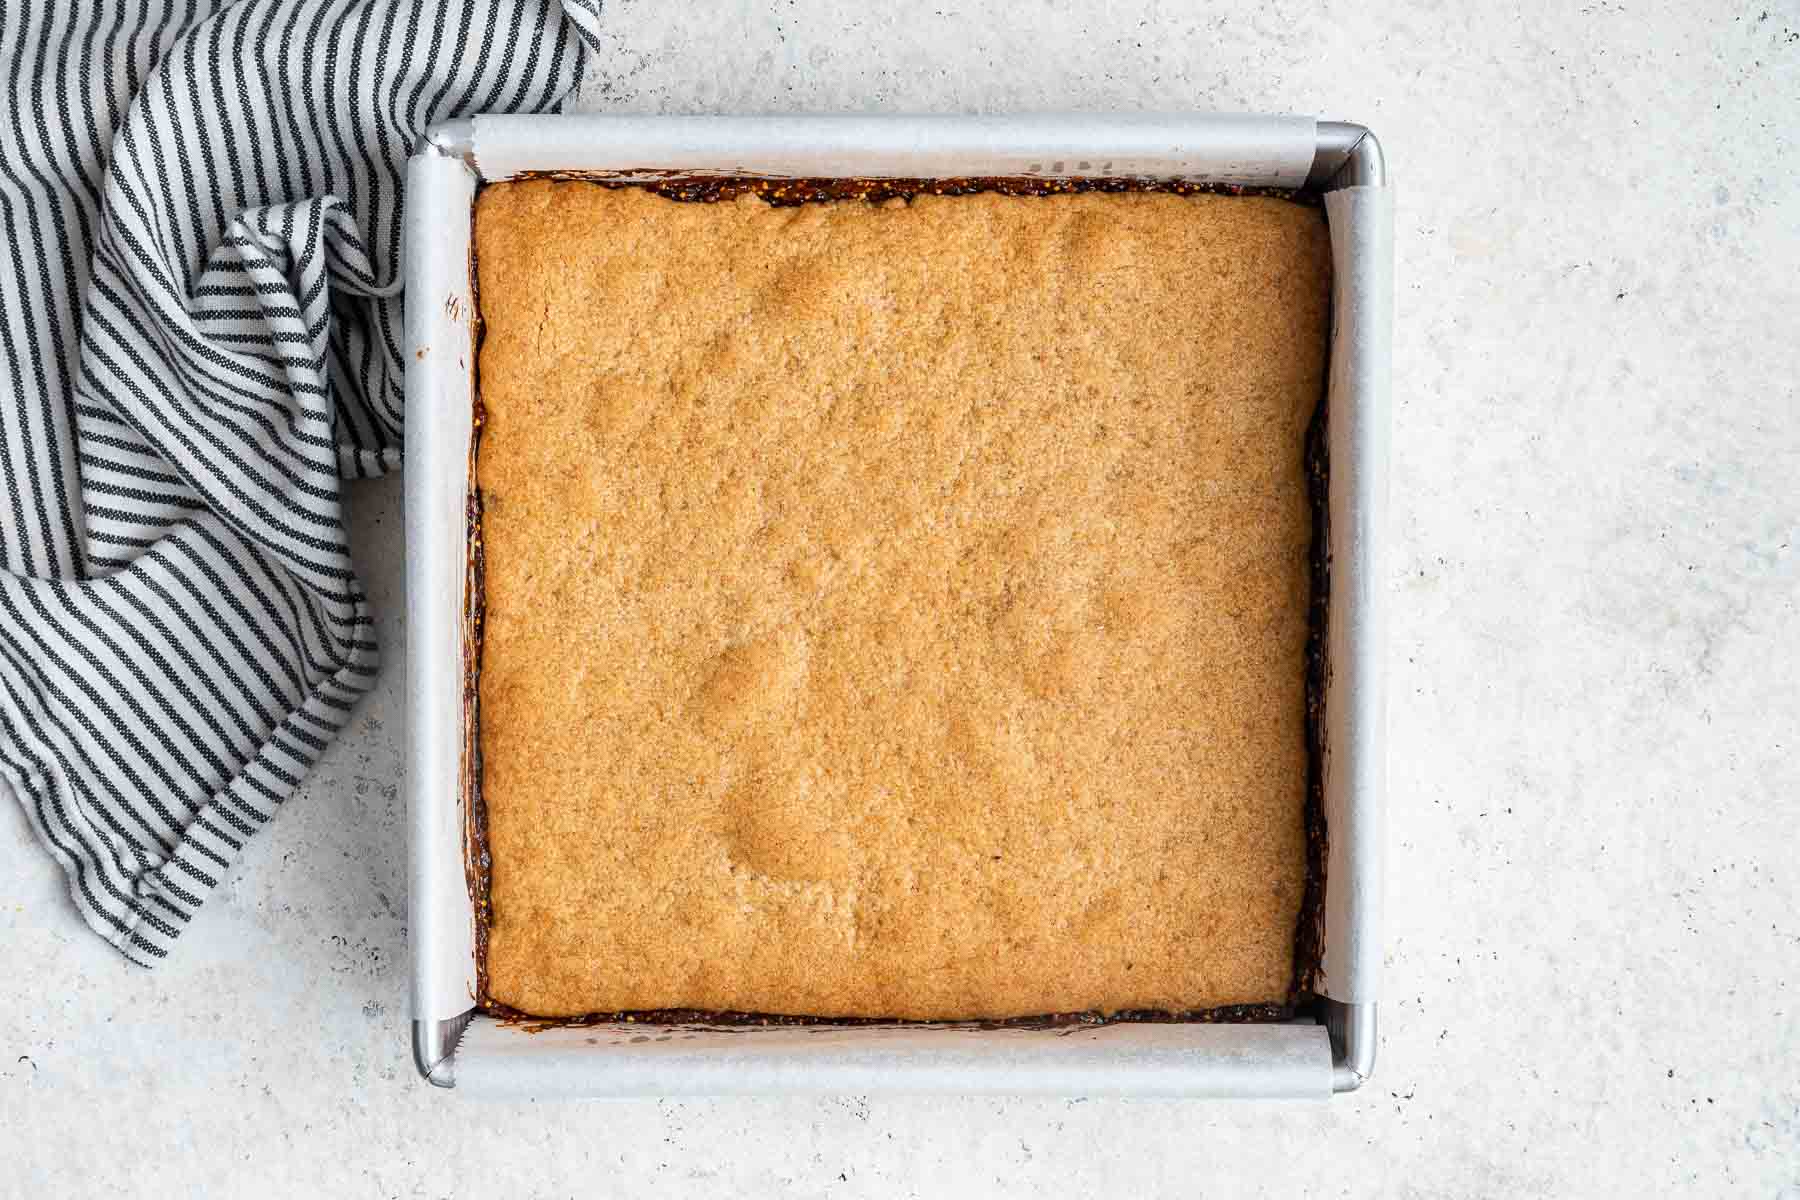 Square pan with golden brown crust baked inside.